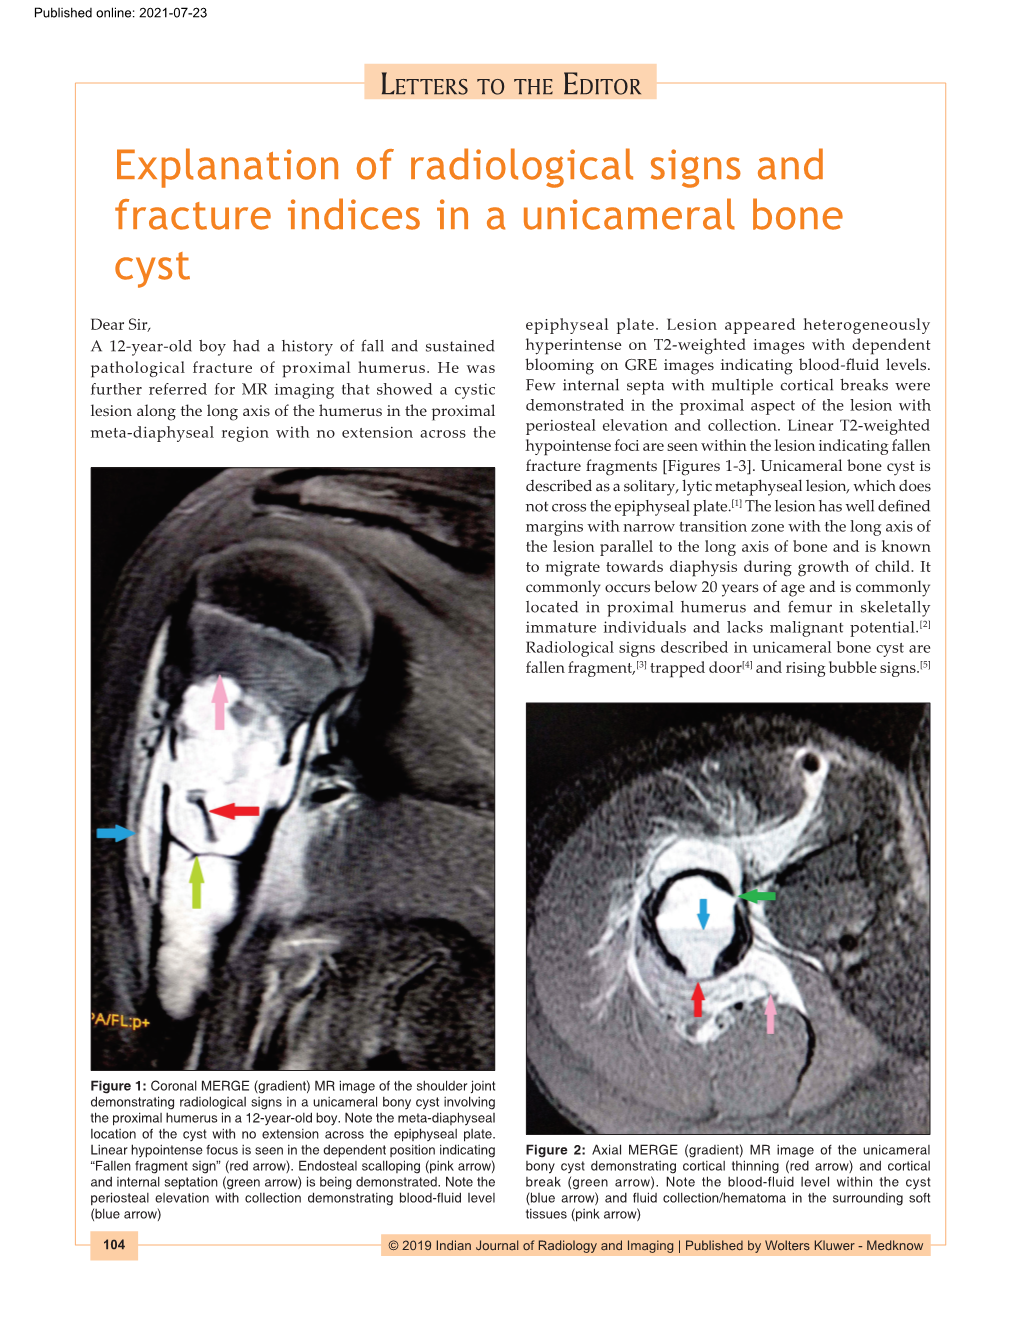 Explanation of Radiological Signs and Fracture Indices in a Unicameral Bone Cyst